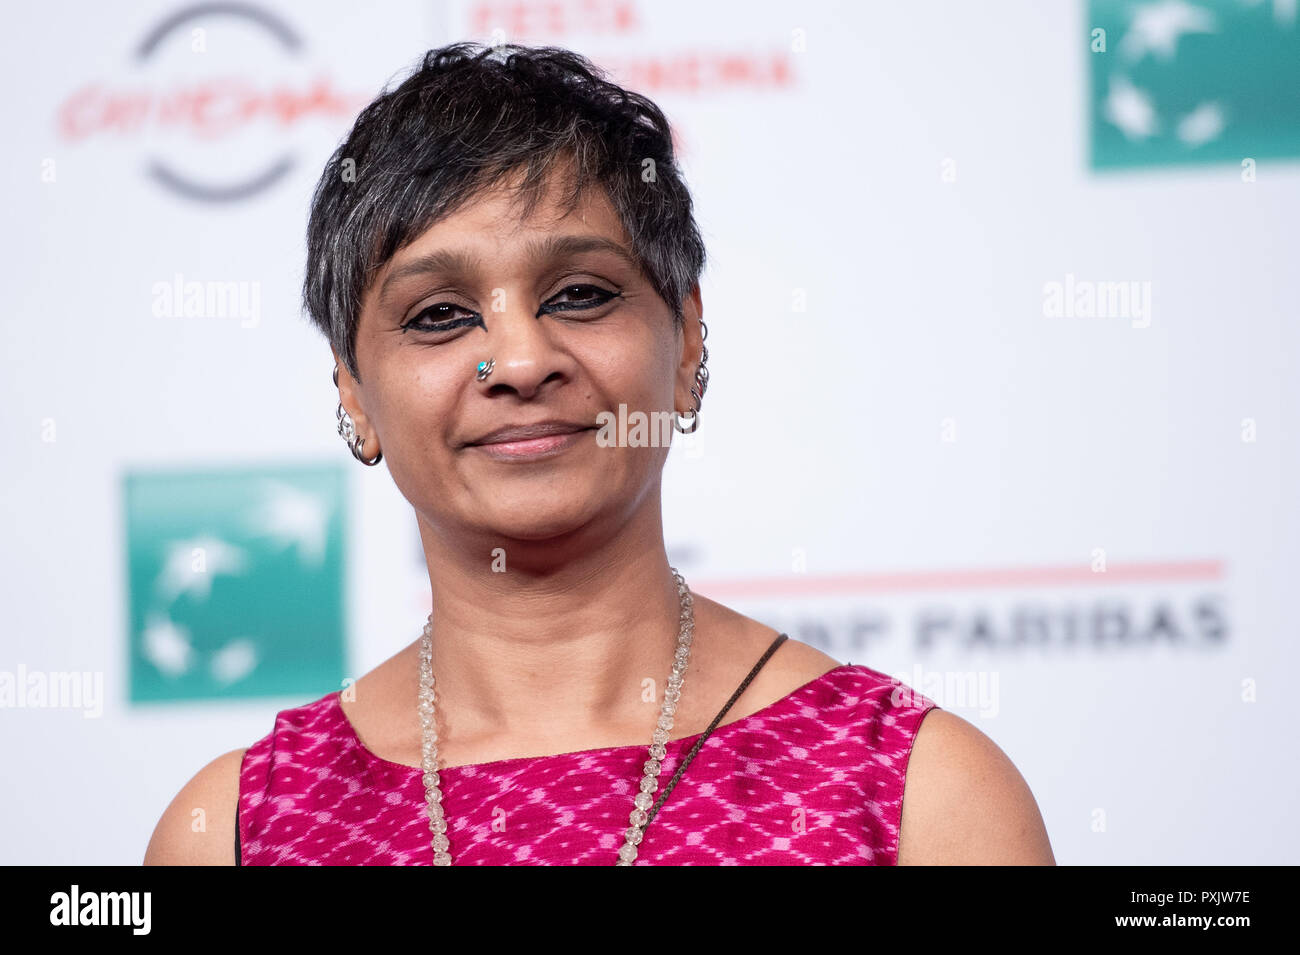 Rome, Italy. 23rd Oct 2018. Bharathi Mehra attends 'My Dear Prime Minister' phootcall during the 13th Rome Film Fest at Auditorium Parco Della Musica on 23 October 2018. Credit: Giuseppe Maffia/Alamy Live News Stock Photo